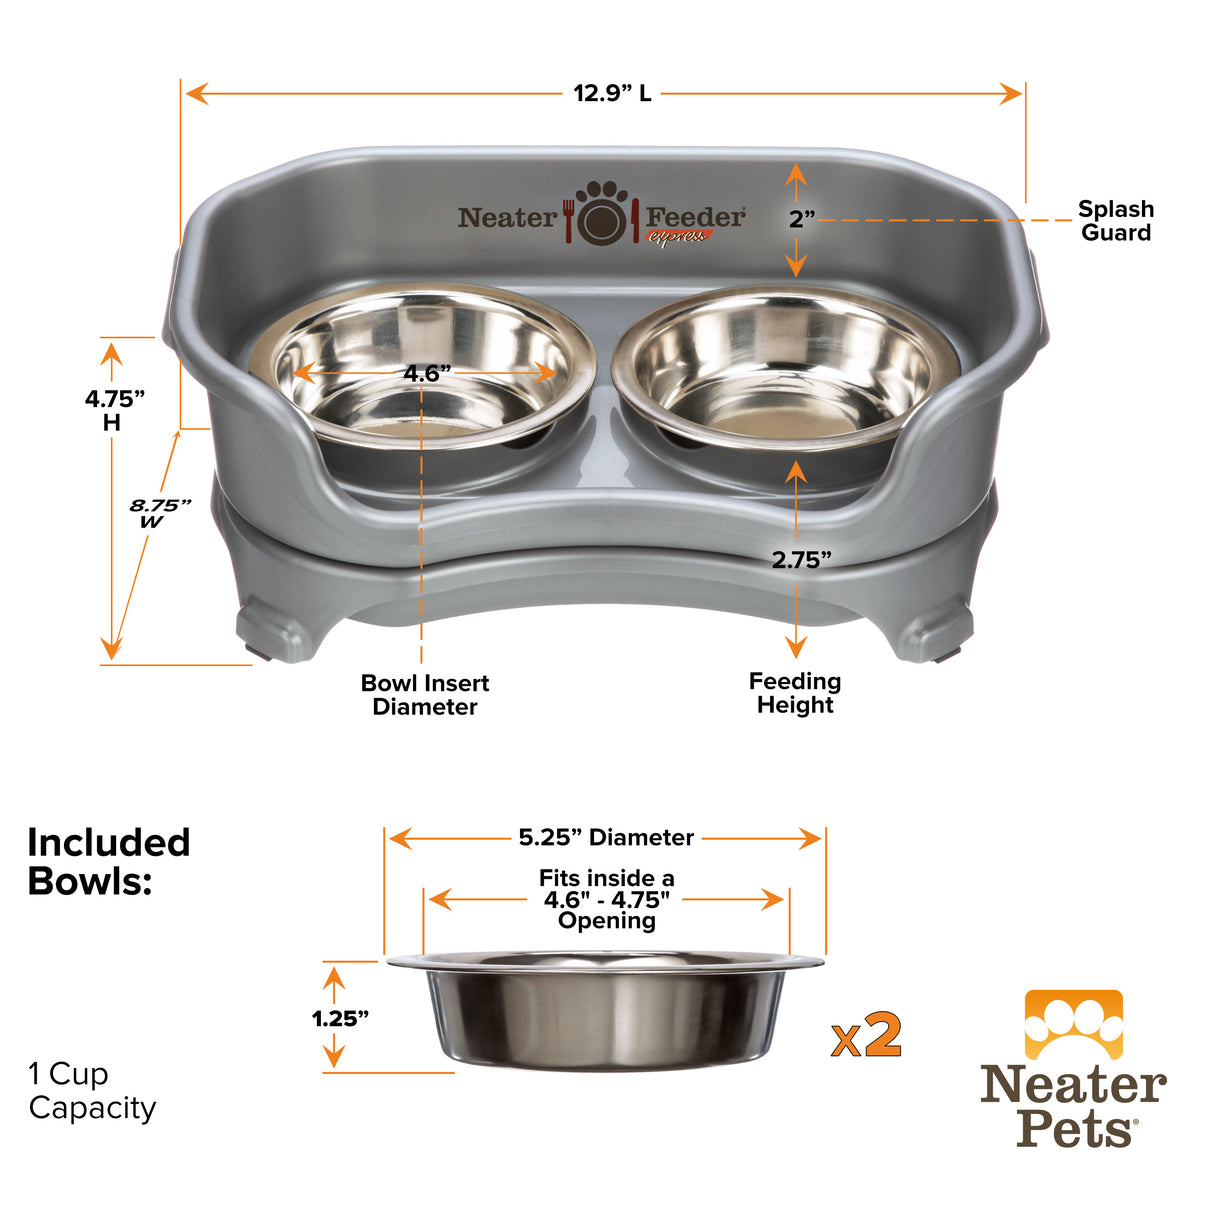 Express cat feeder and bowl dimensions